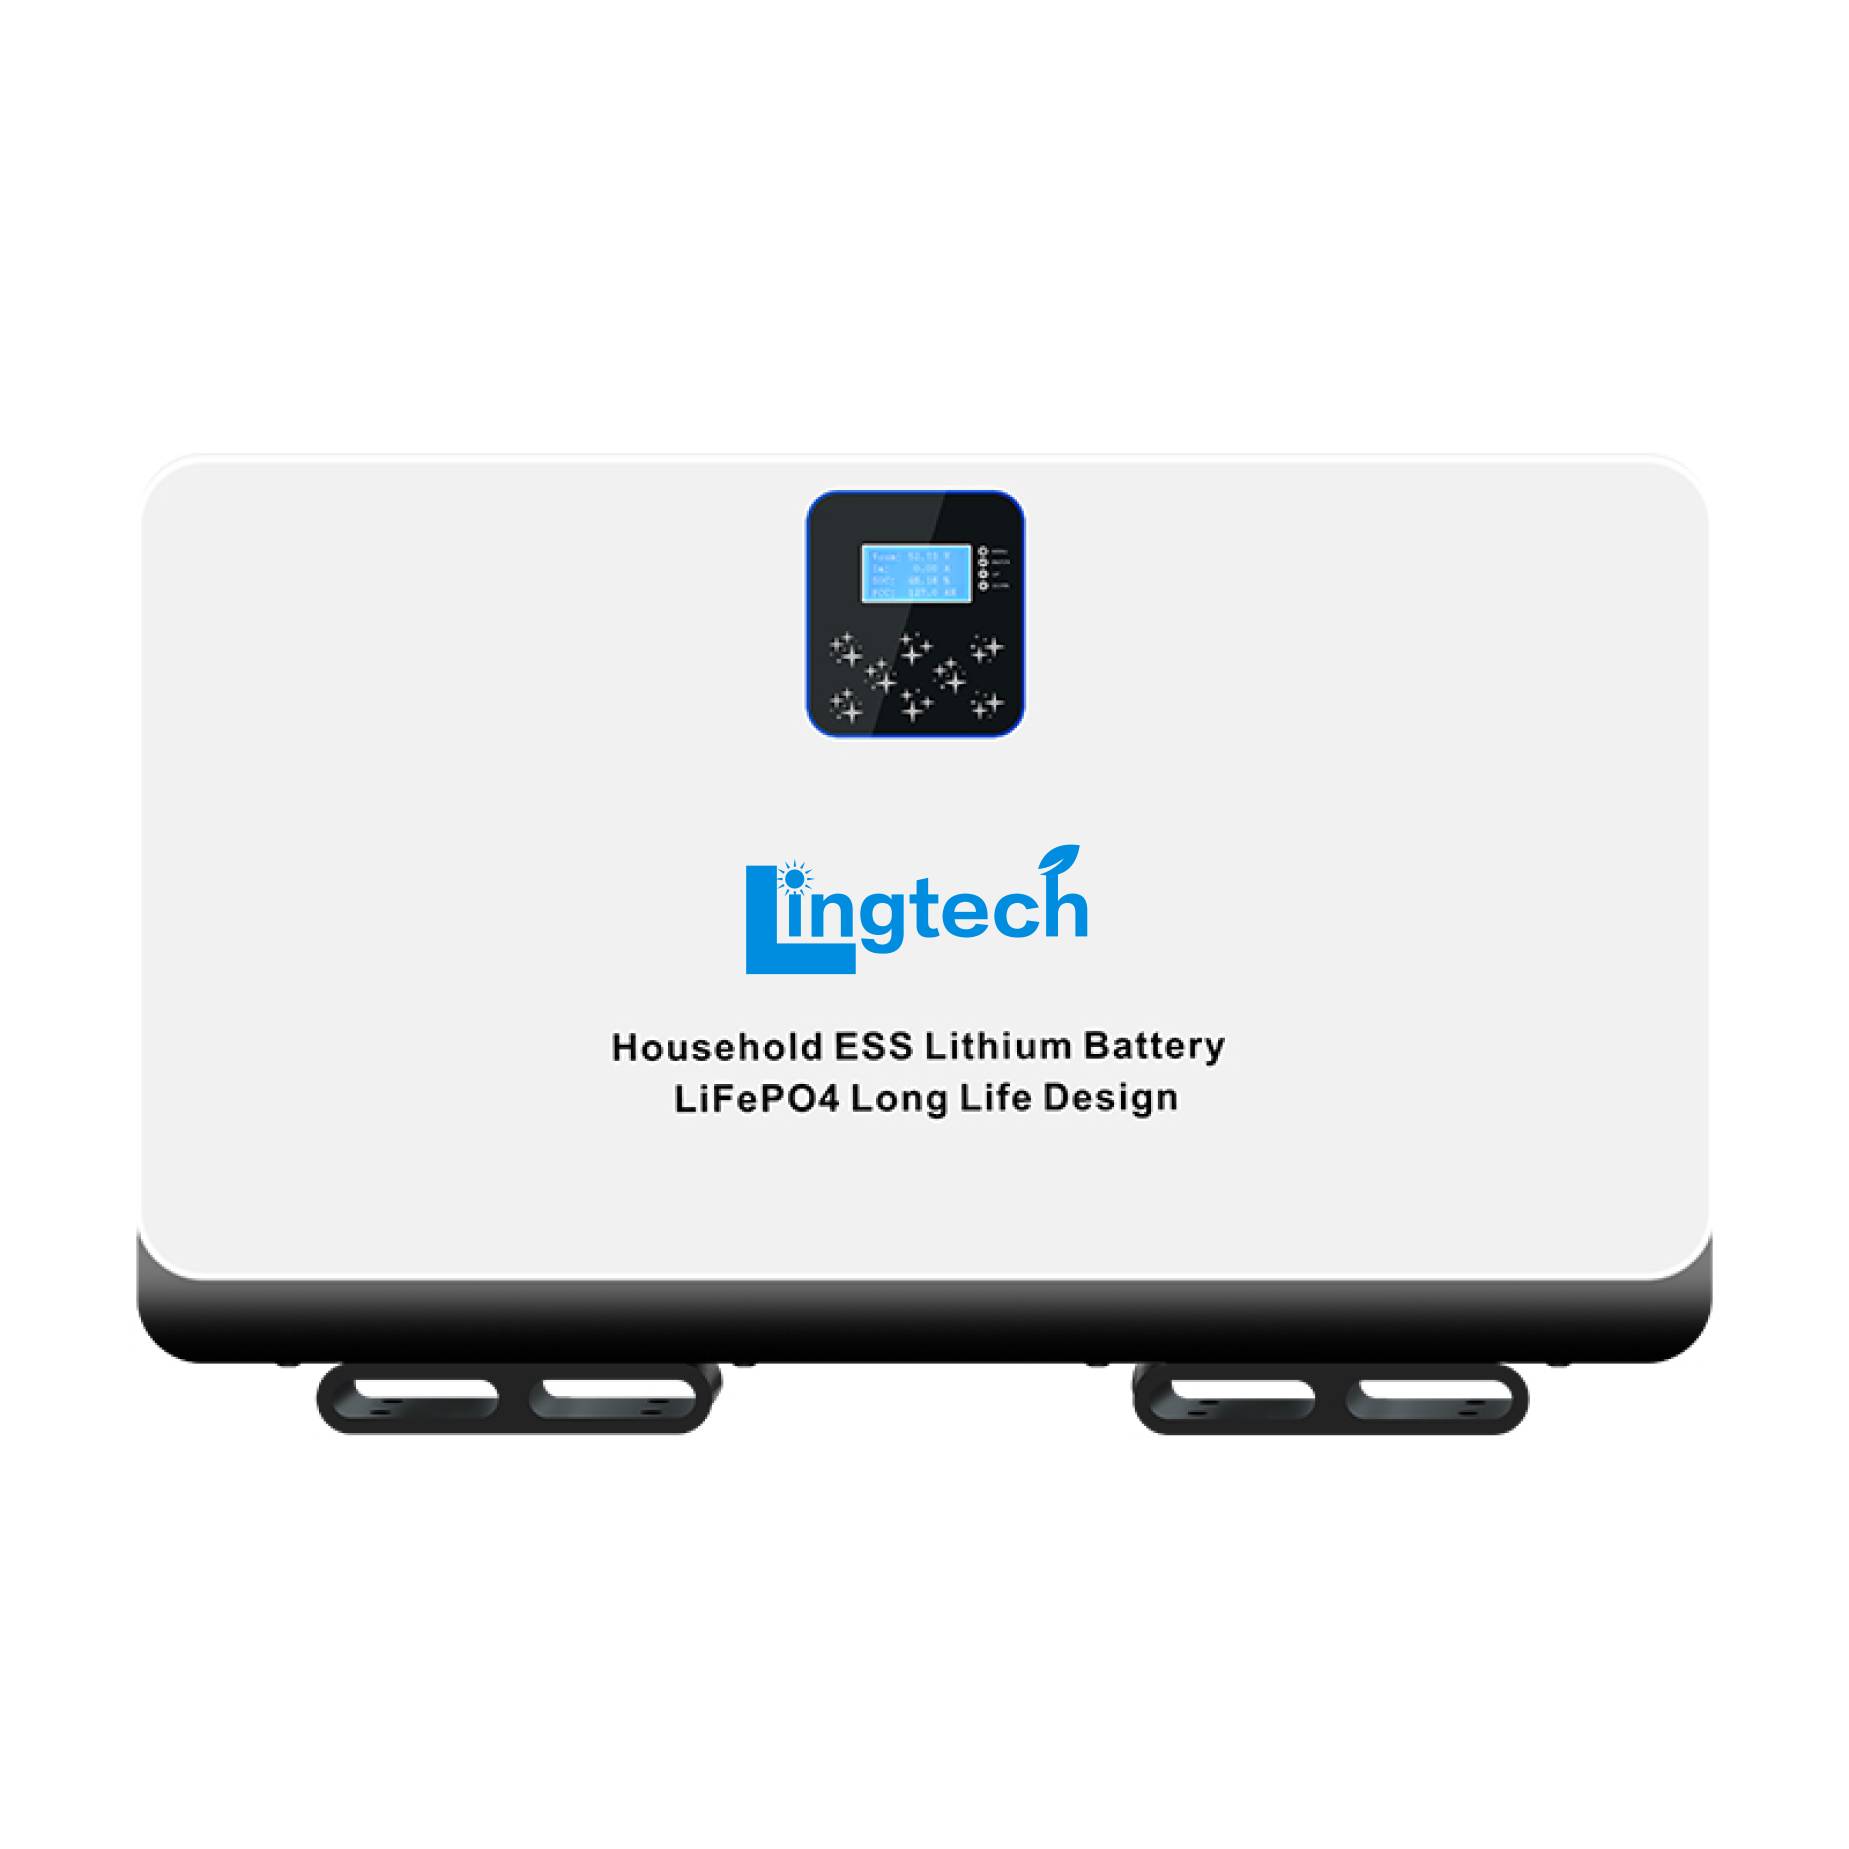 Lingtech 6kwh TV style residential battery ess